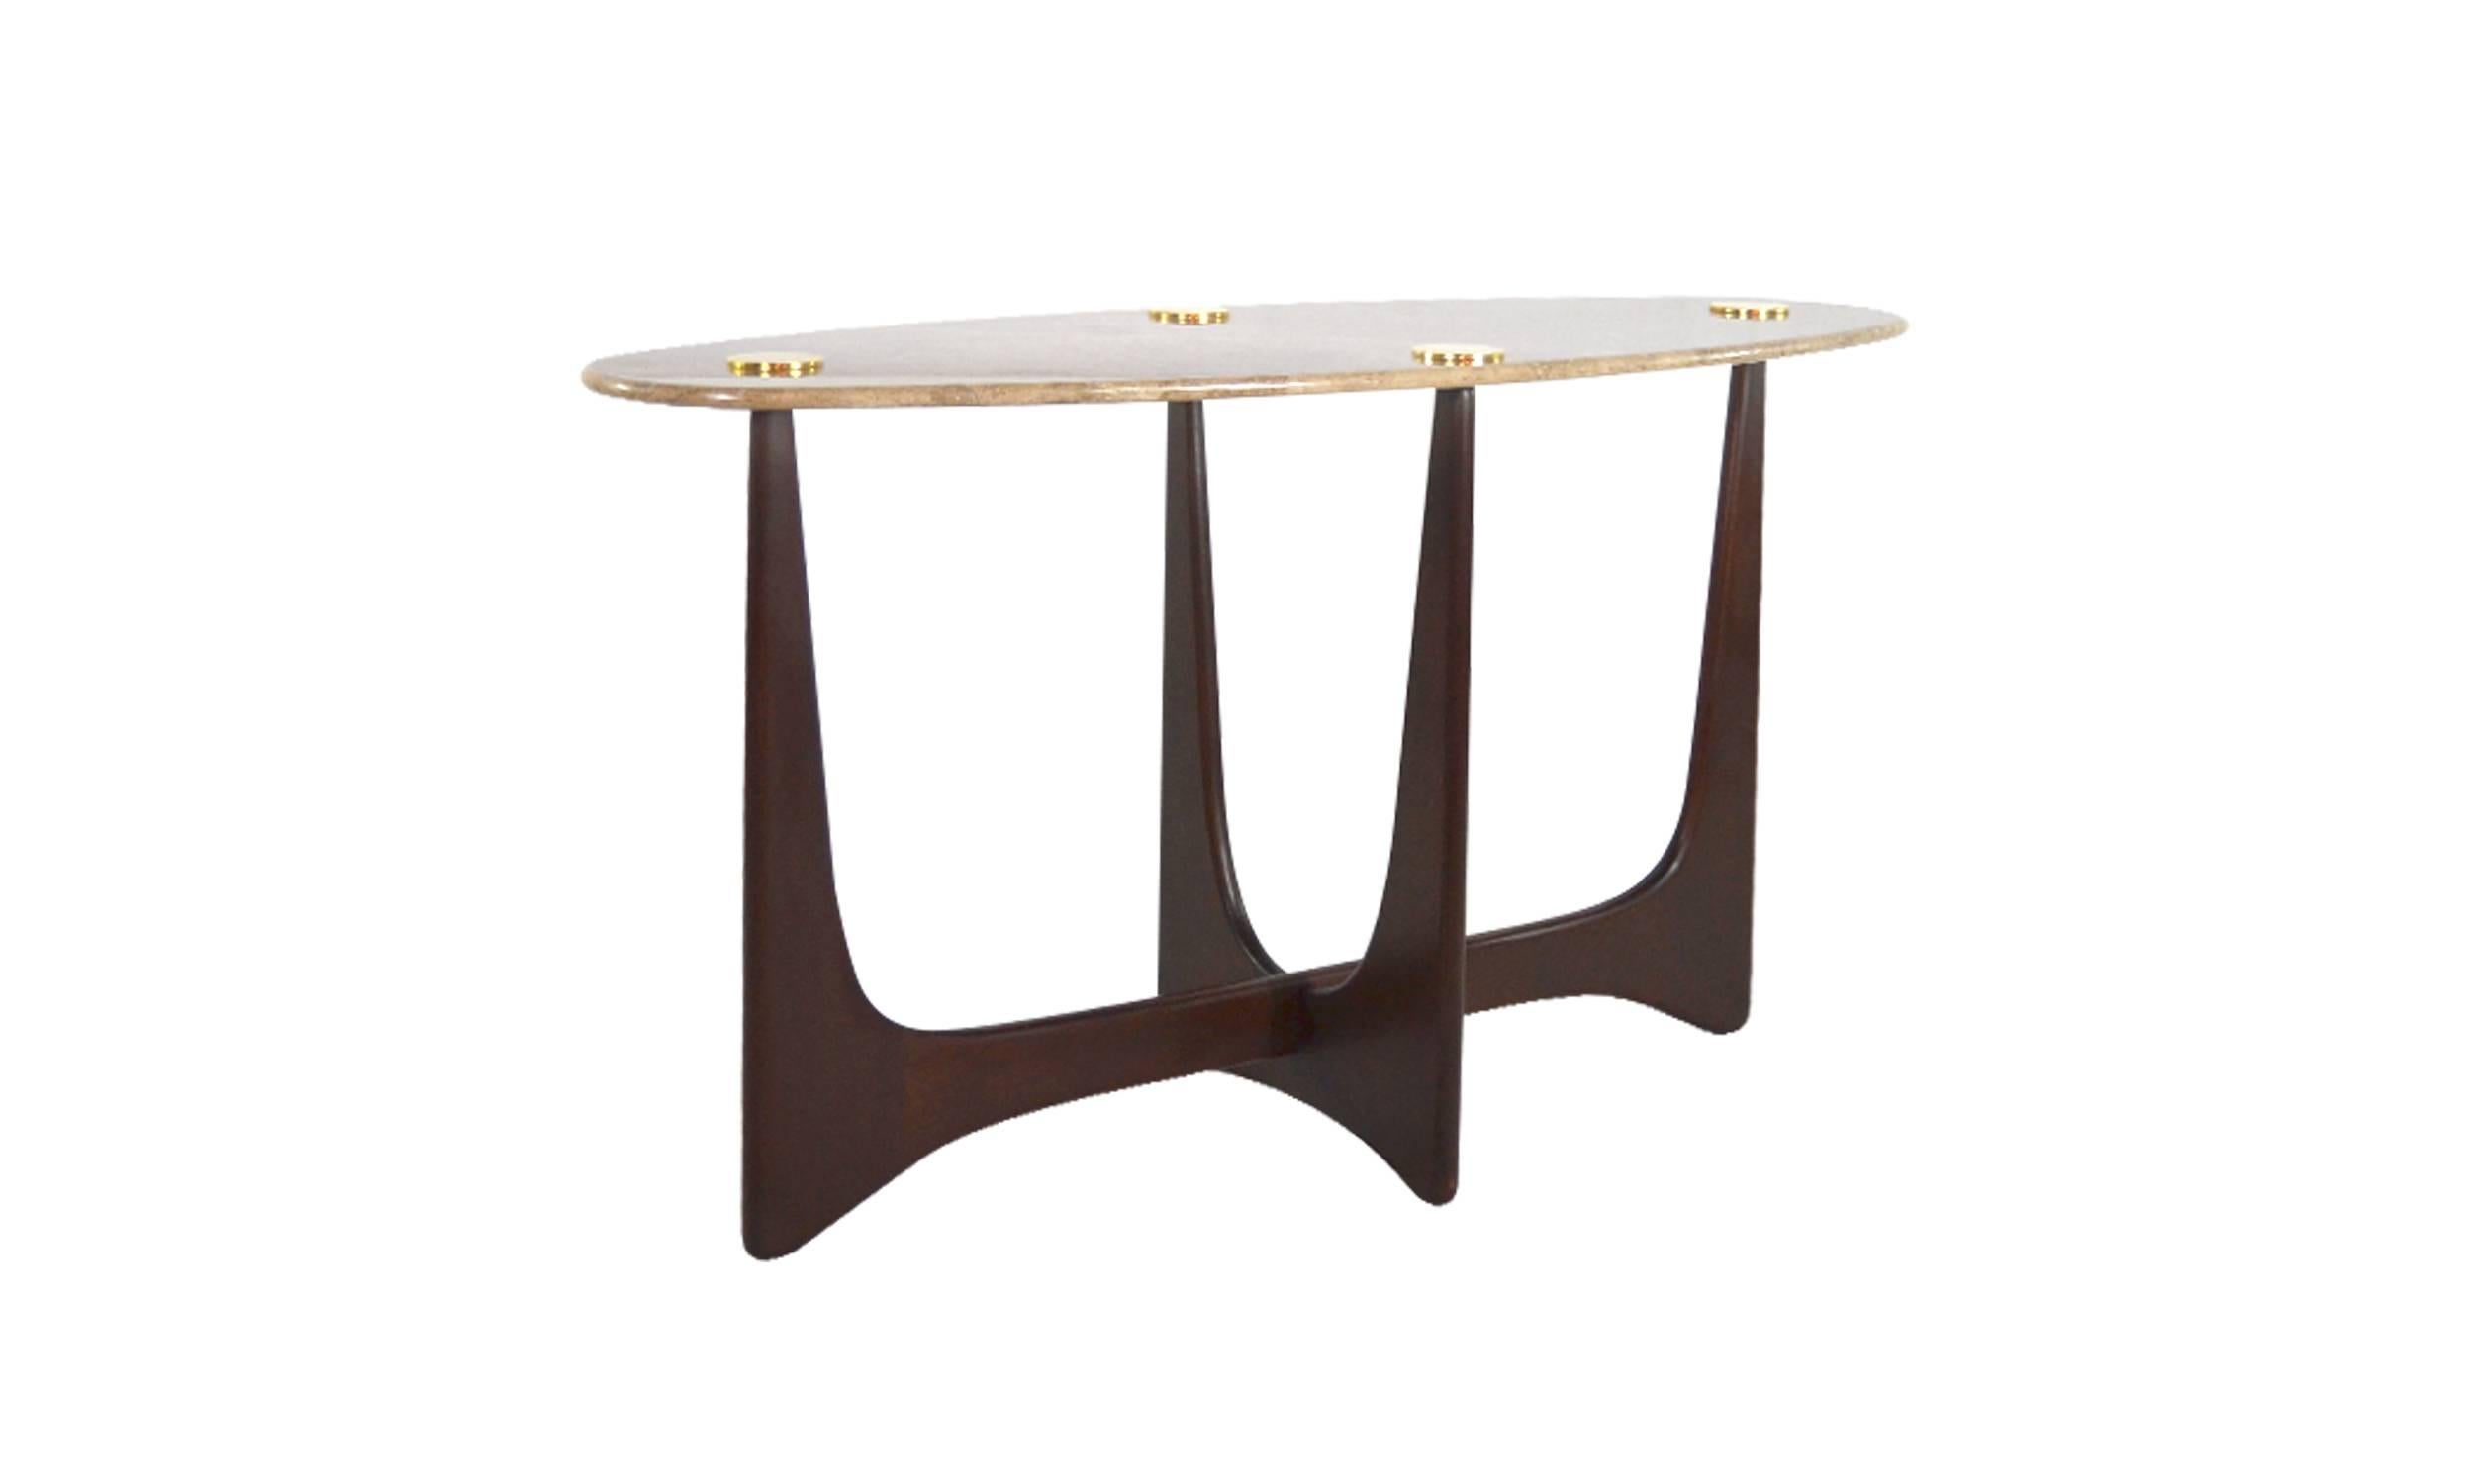 The "Opalo" console is a light and airy yet very strong piece of furniture supported by a hand-sculpted walnut base stained in a medium tone.
For a top we've chosen an oval shaped bull-nosed edge marble-top, highlighted and fastened in